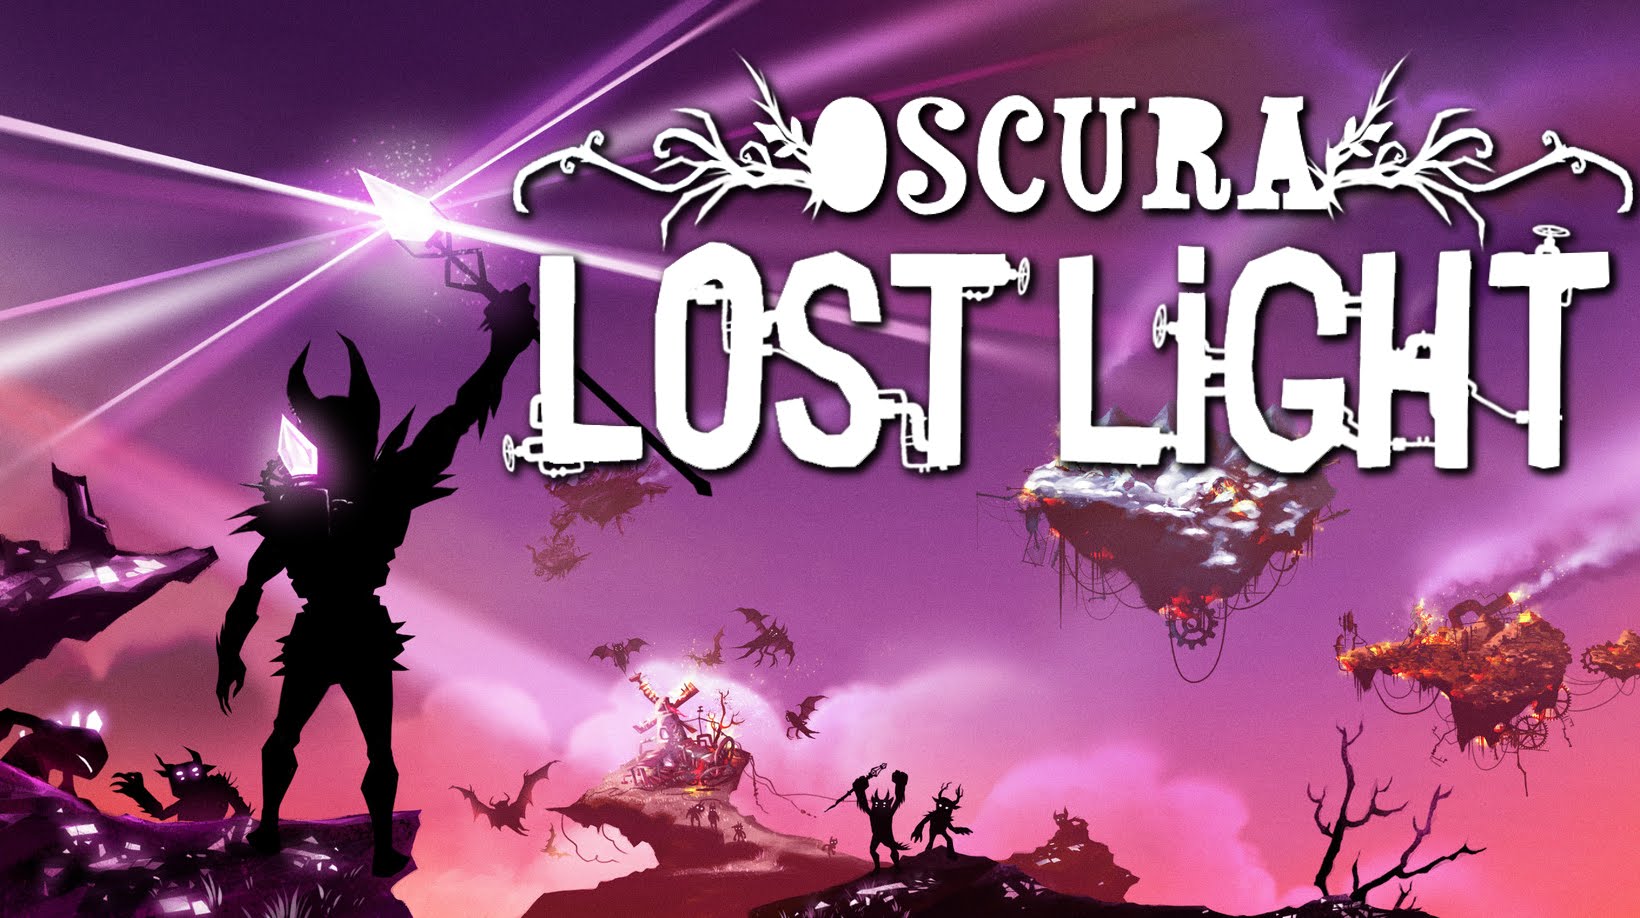 Nice Images Collection: Oscura: Lost Light Desktop Wallpapers